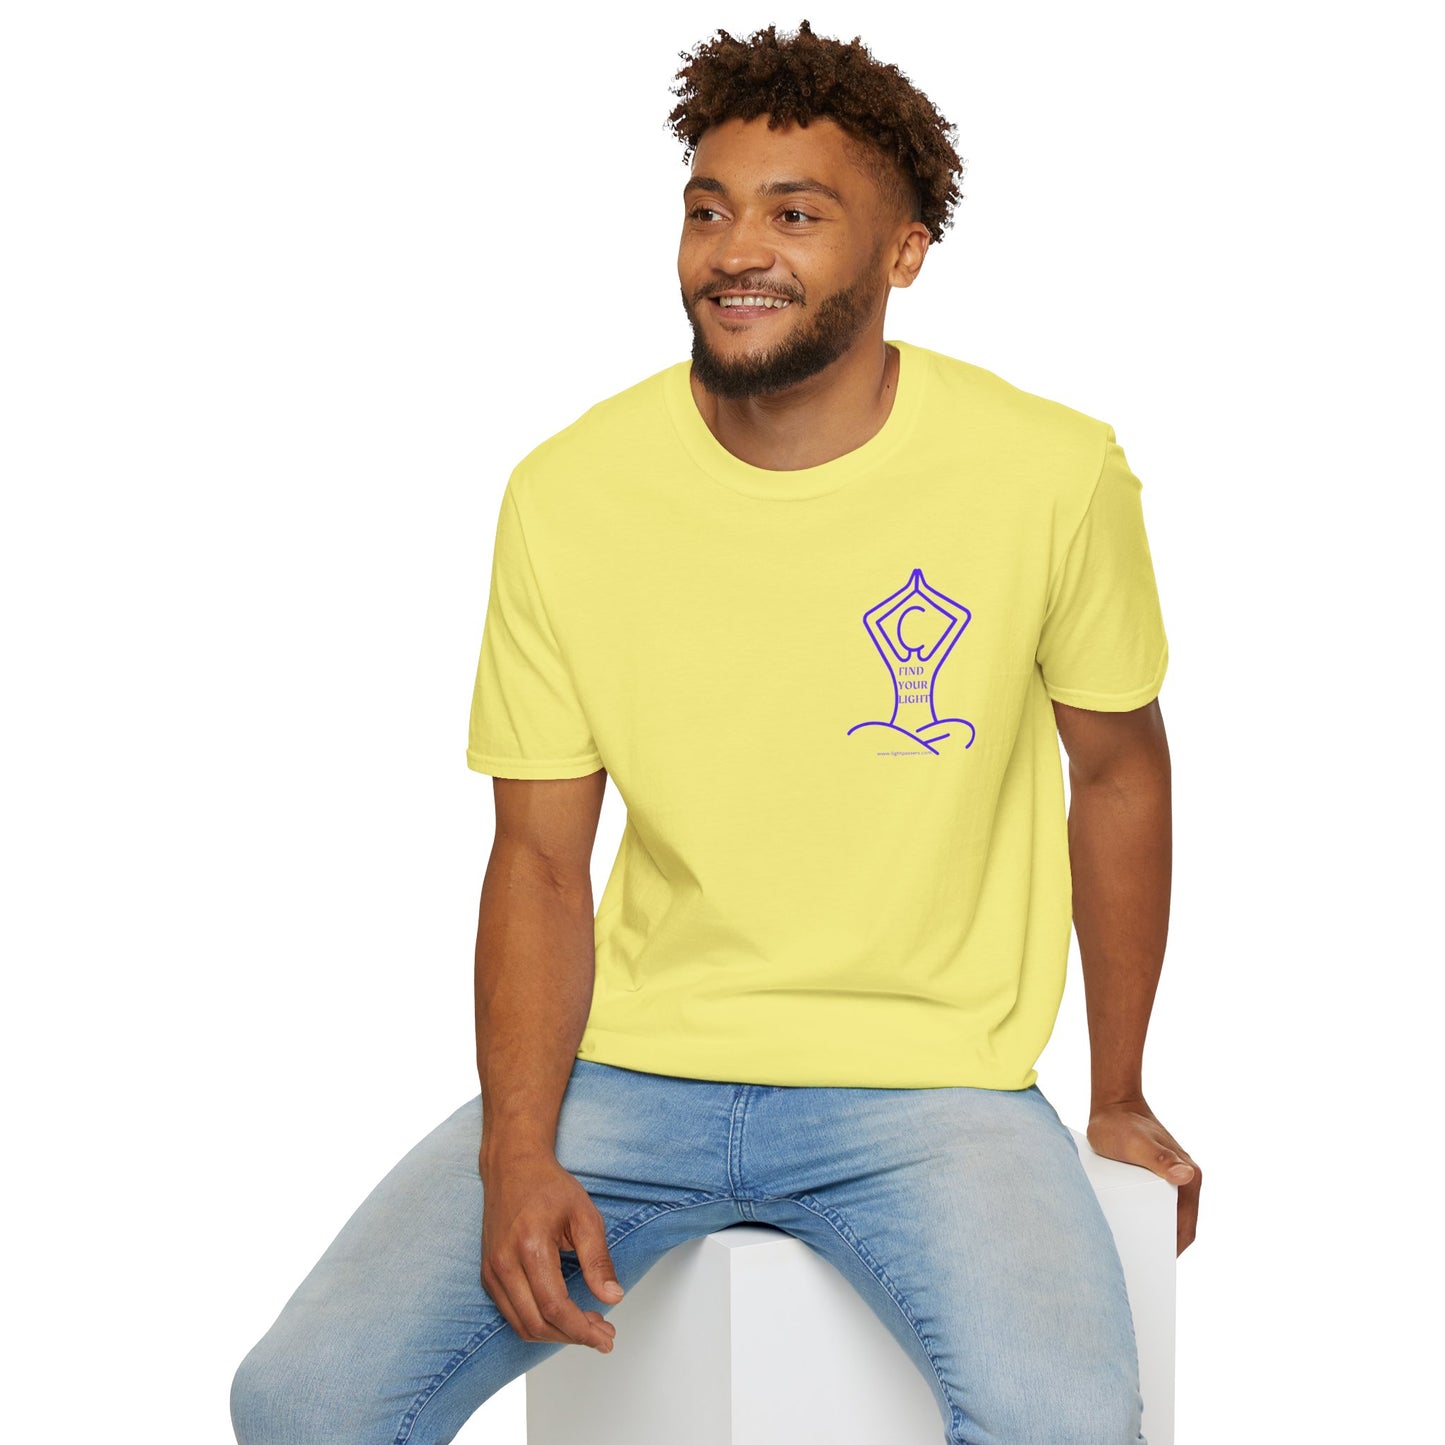 Light Passers Marketplace Yoga Find Your Light Unisex Soft T-Shirt Simple Messages, Fitness, Mental Health